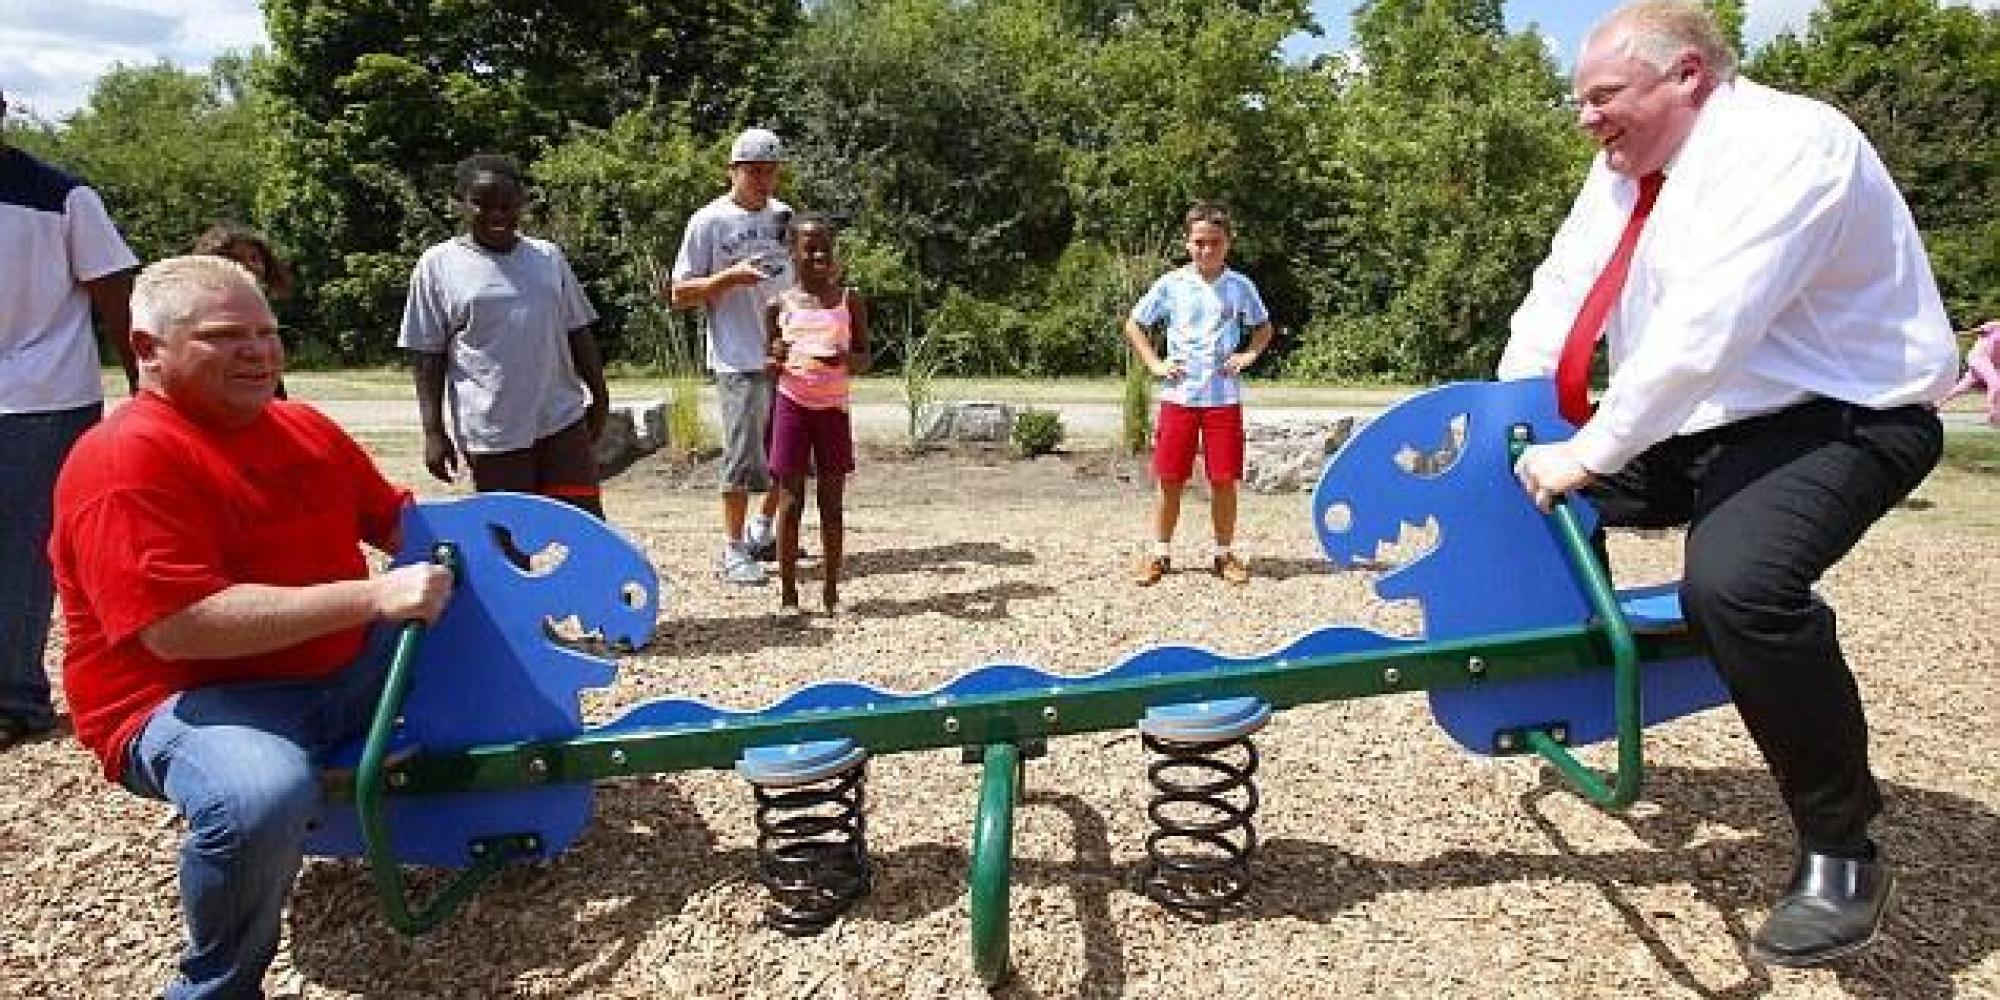 Rob Ford Rides A Seesaw With His Brother In A Toronto Park | HuffPost